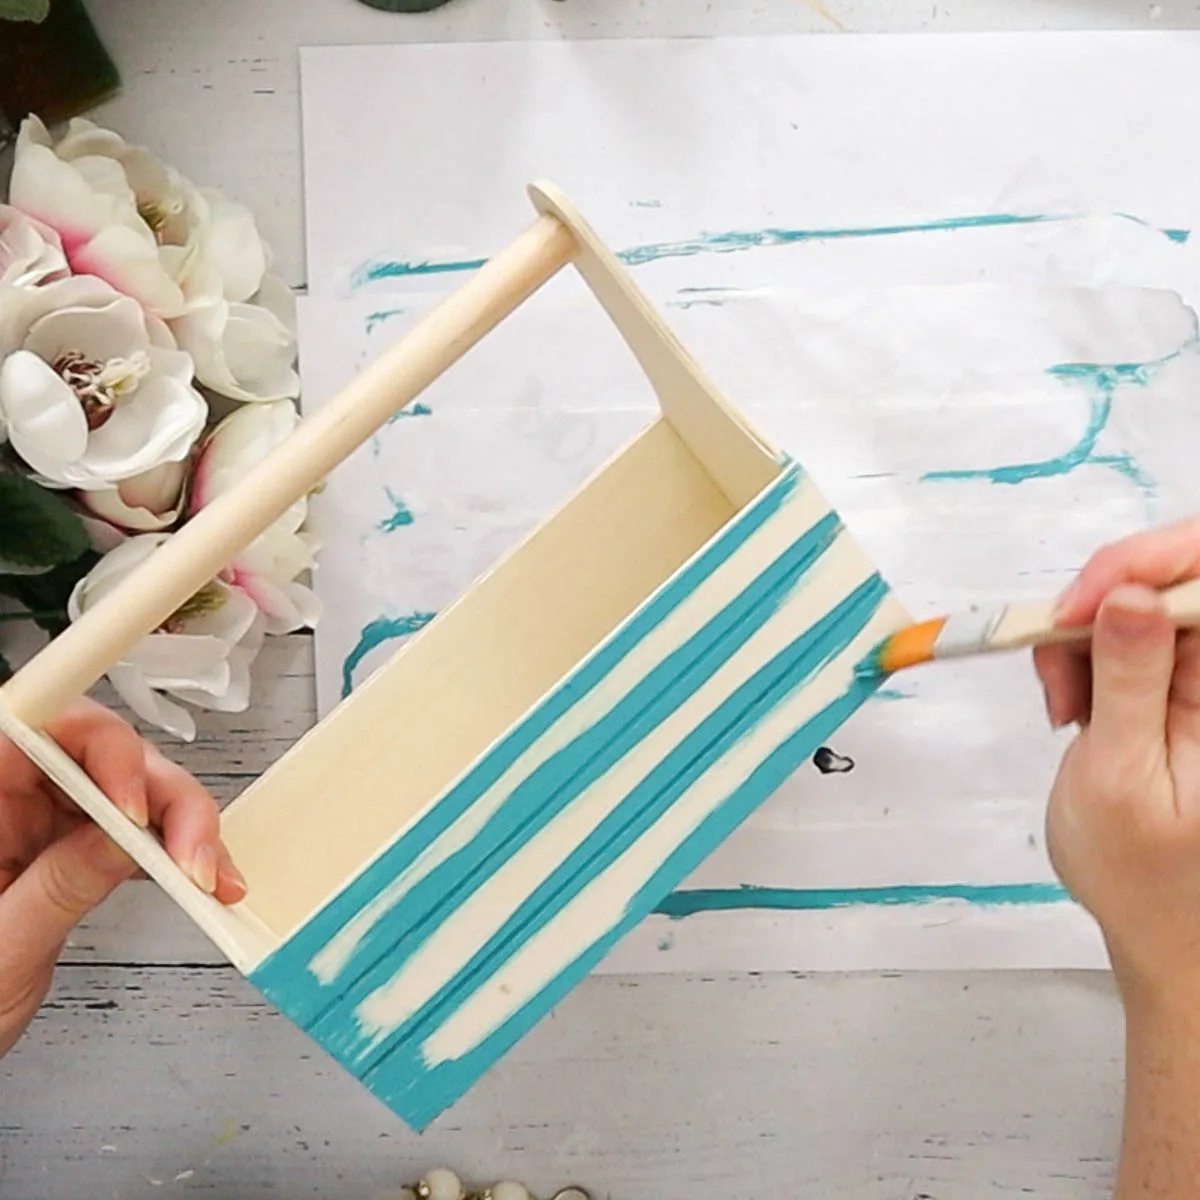 Painting a wooden caddy with blue paint.